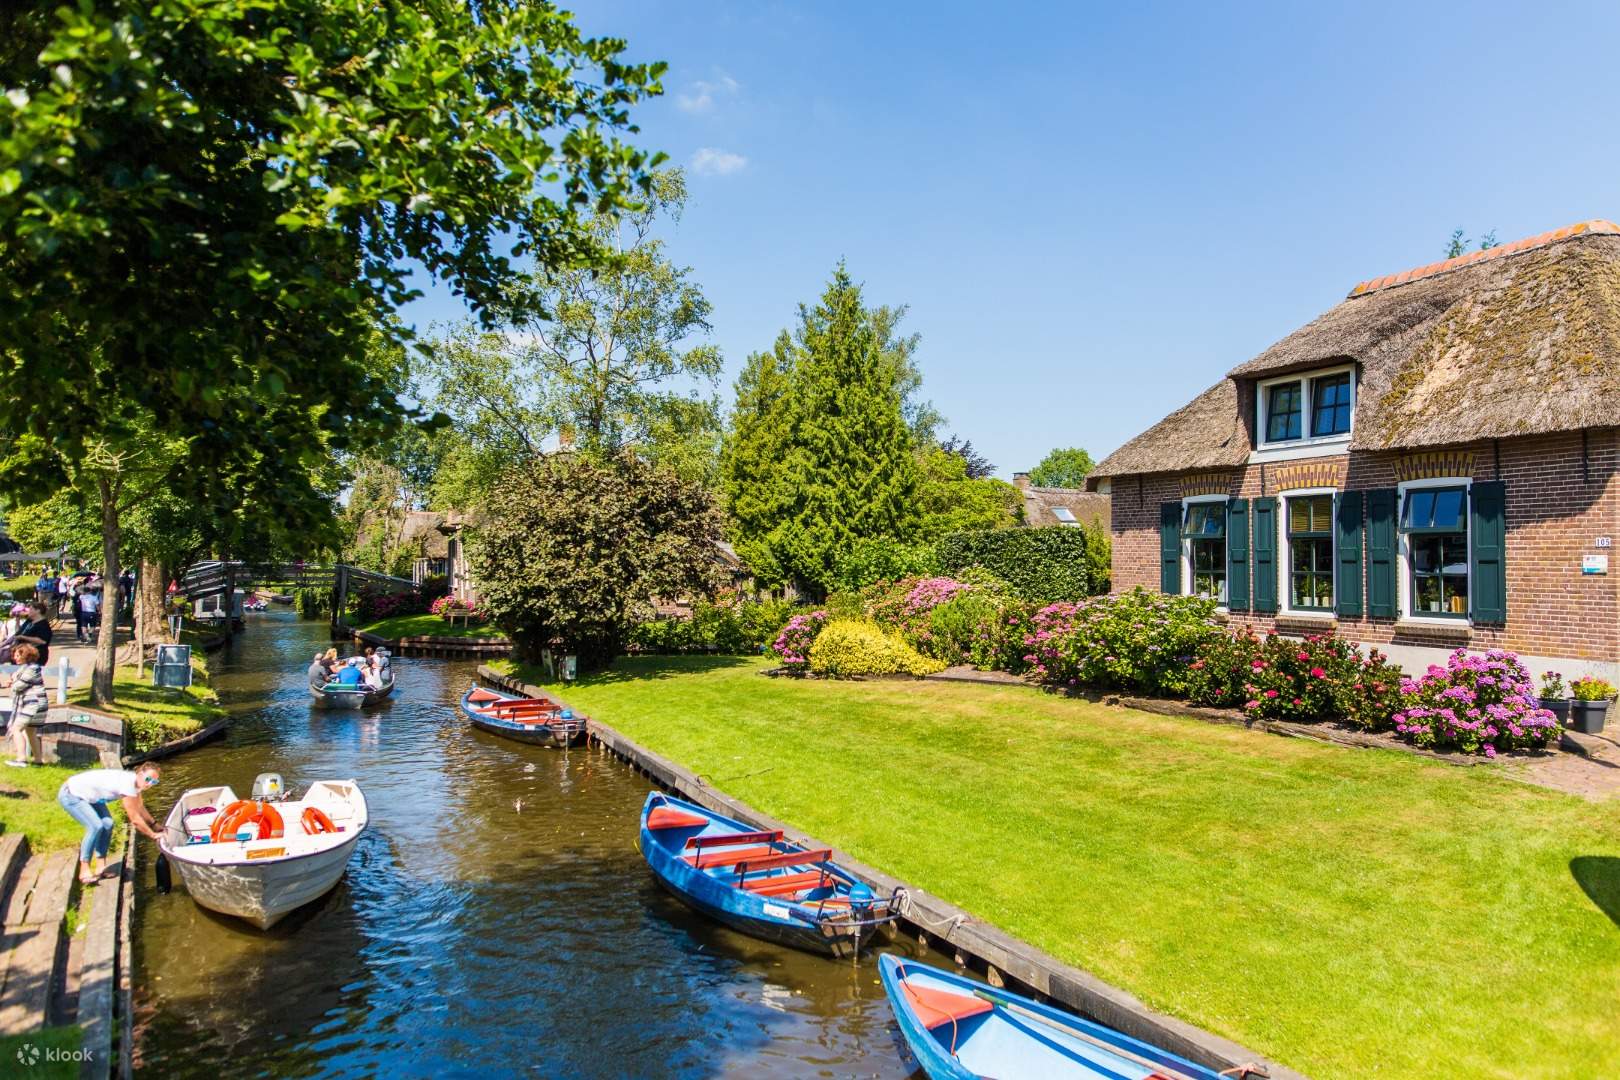 12 Best Things To Do In Giethoorn, The Netherlands - Updated | Trip101